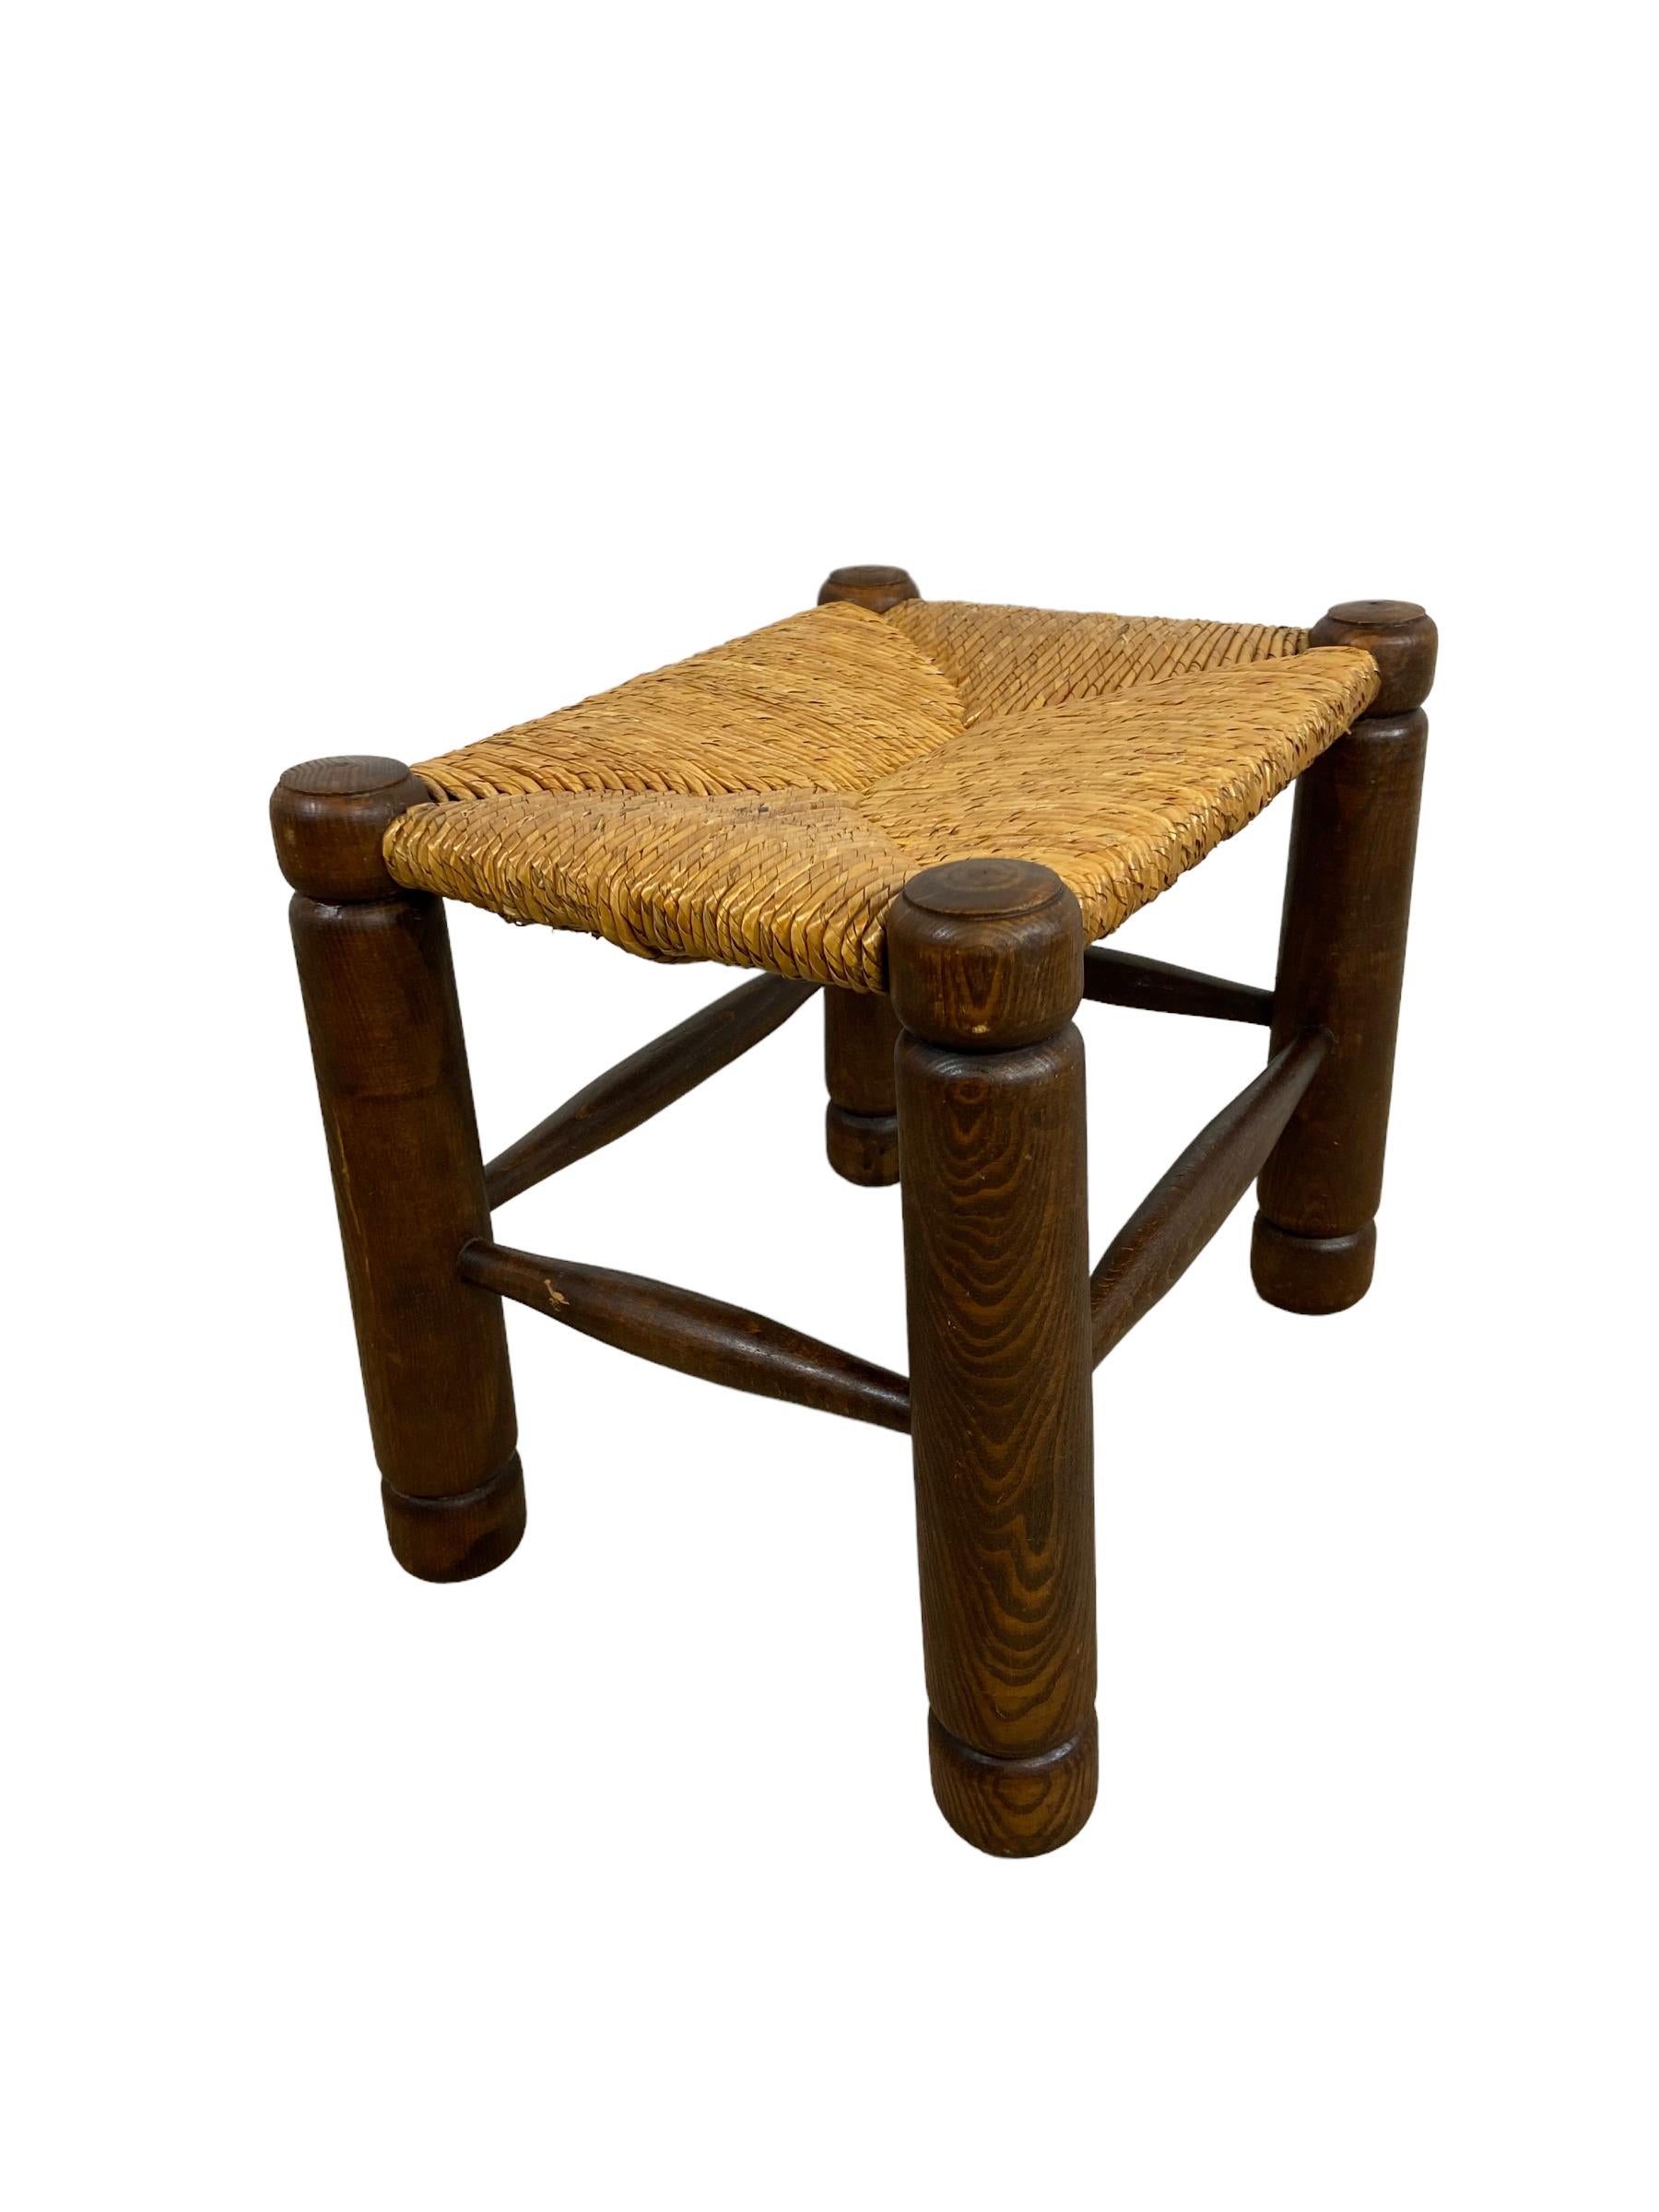 Brutalist stool made of oak, with a rush seat. Made in The Netherlands in the 1960s. This vintage object is in a good condition but it shows sign of age.